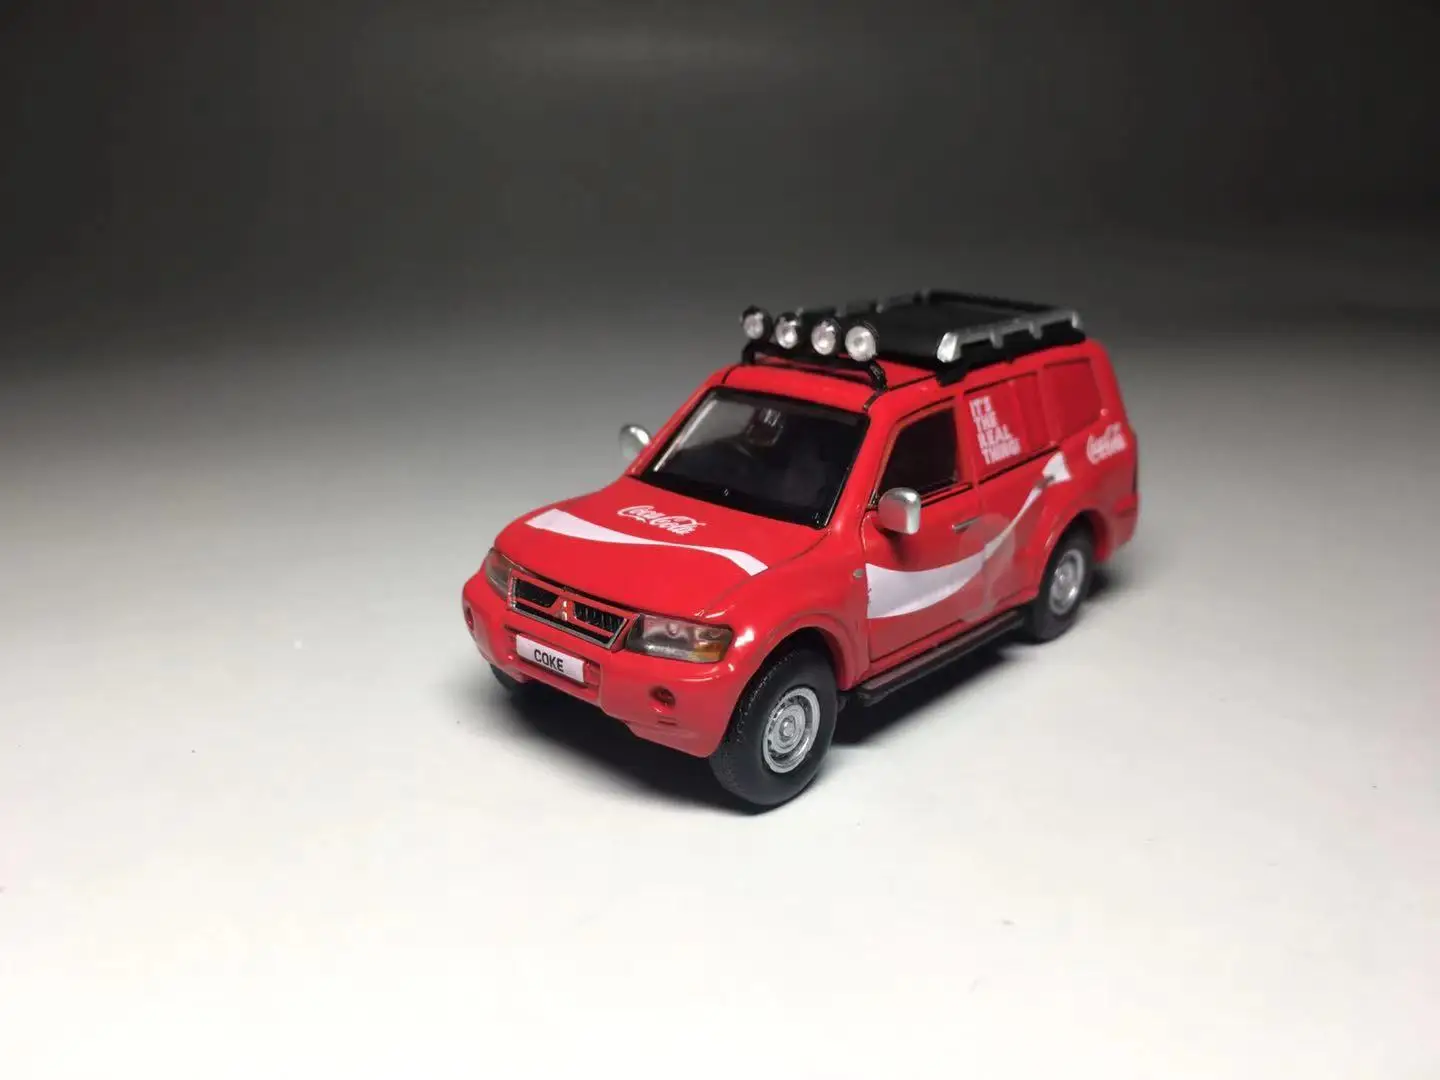 

Tiny 1/64 Mitsubishi Pajero COKE010 Die Cast Model Car Collection Limited